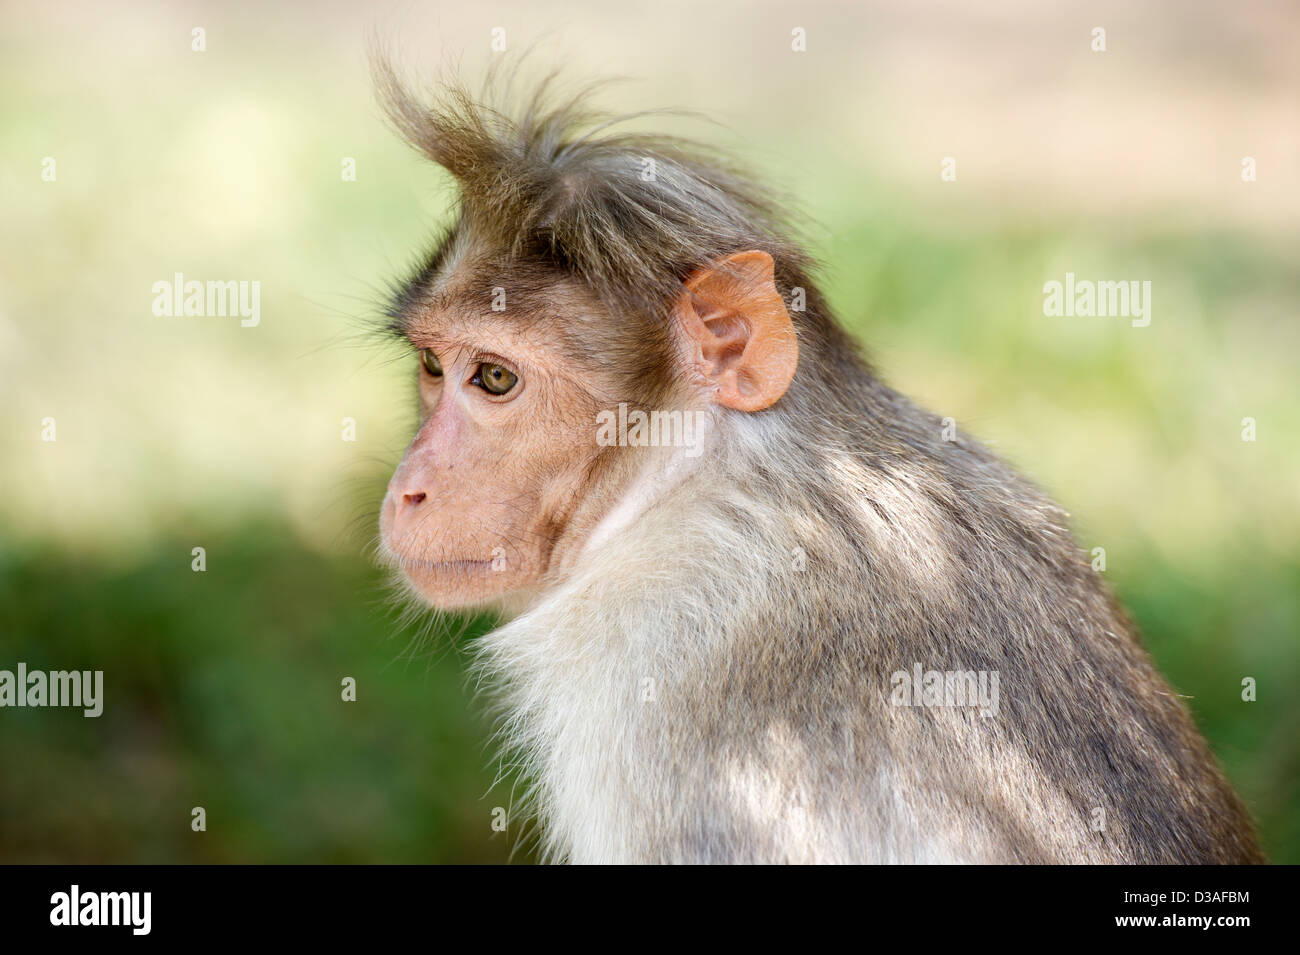 A Bonnet Macaque (Macaca radiata) in the Periyar Tiger Reserve near Thekkady in the Western Ghats, Kerala, India Stock Photo